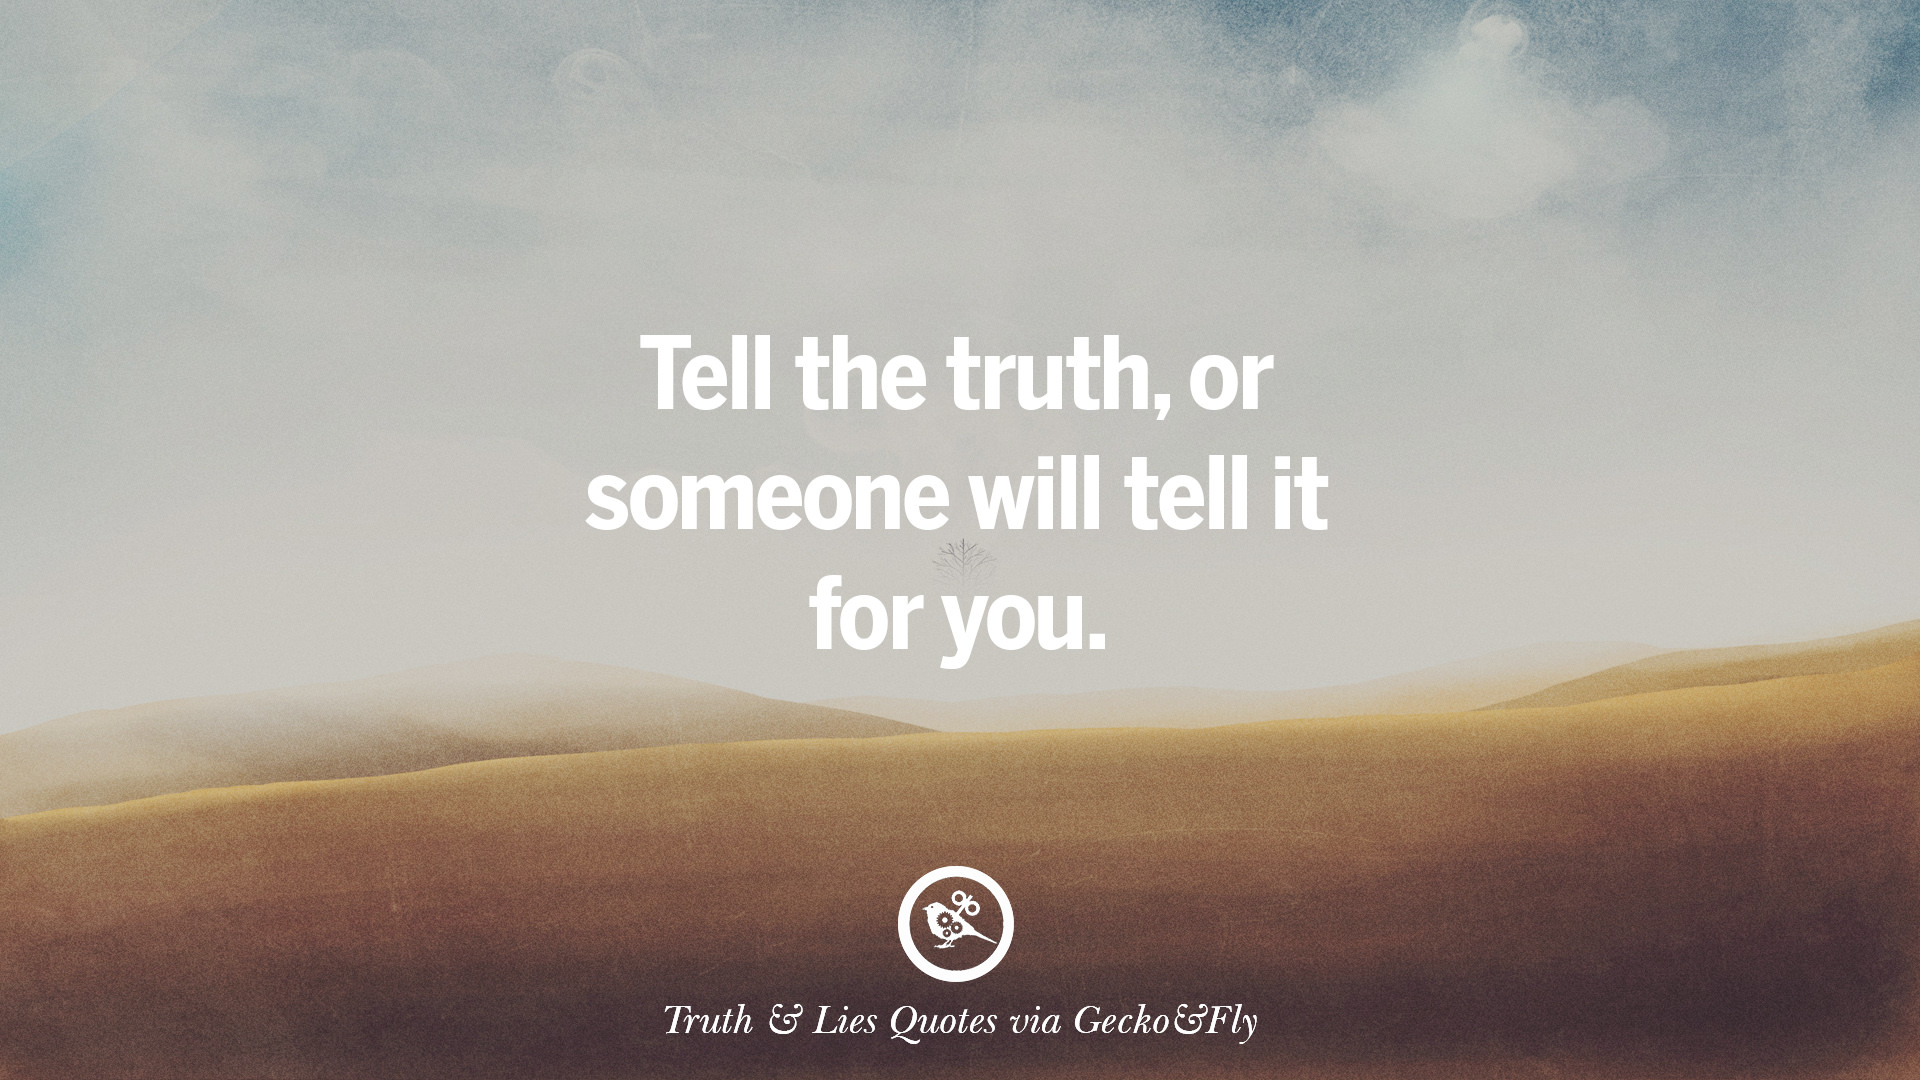 Quotes about believing someones lies